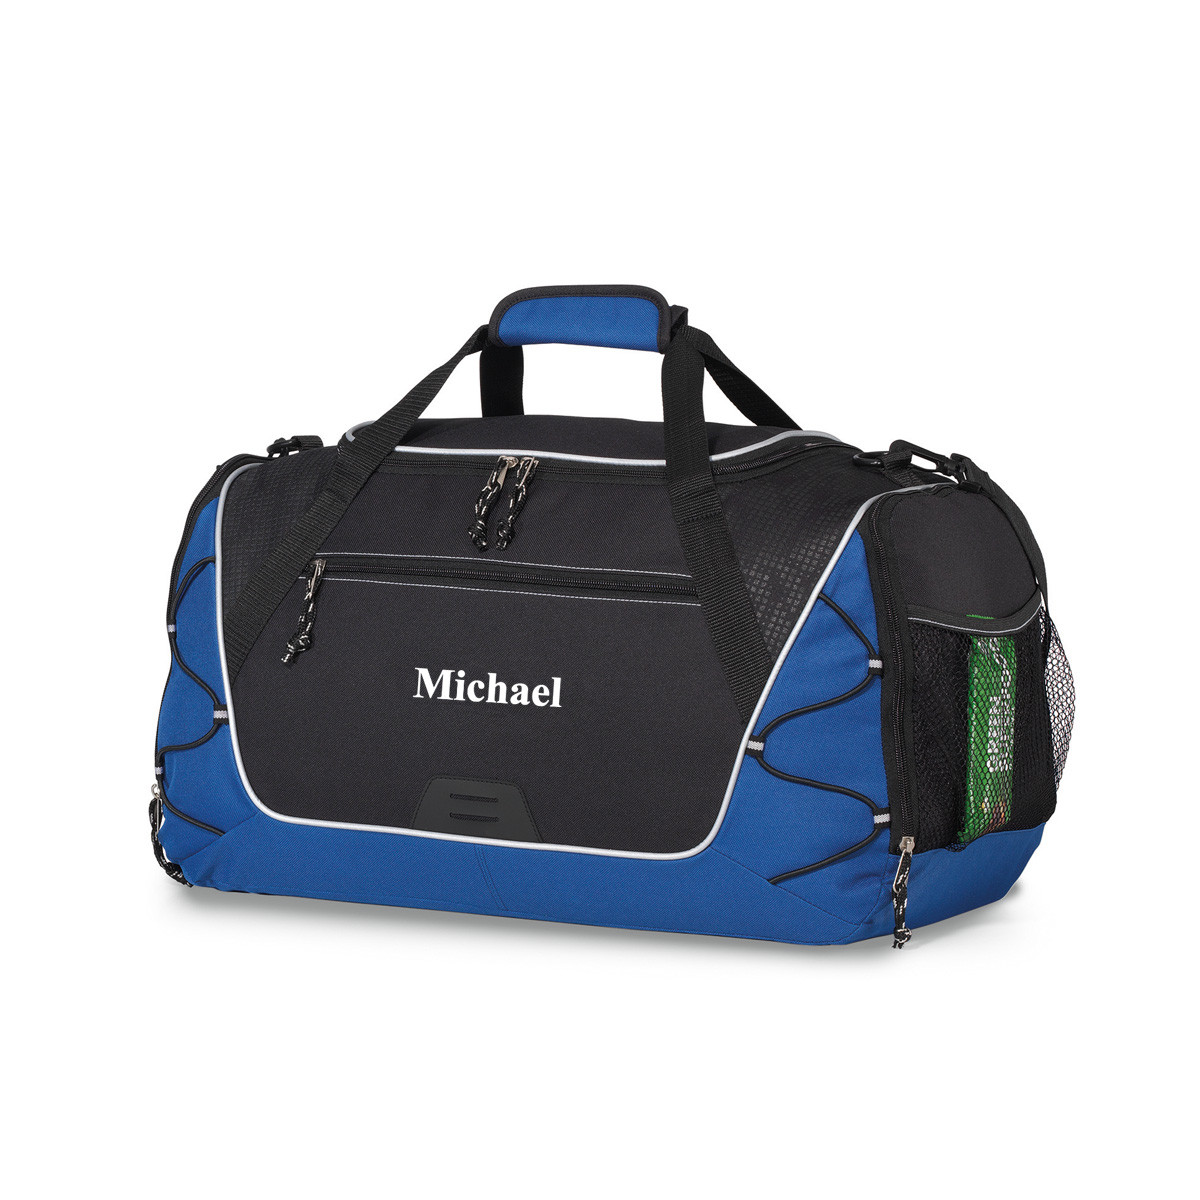 This sports bag can hold numerous items within its spacious compartments and pockets. Its tough construction and easy handling is complemented by customized detailing. Pack all your belongings required for an adventurous outdoor trip safely in this custo #sports